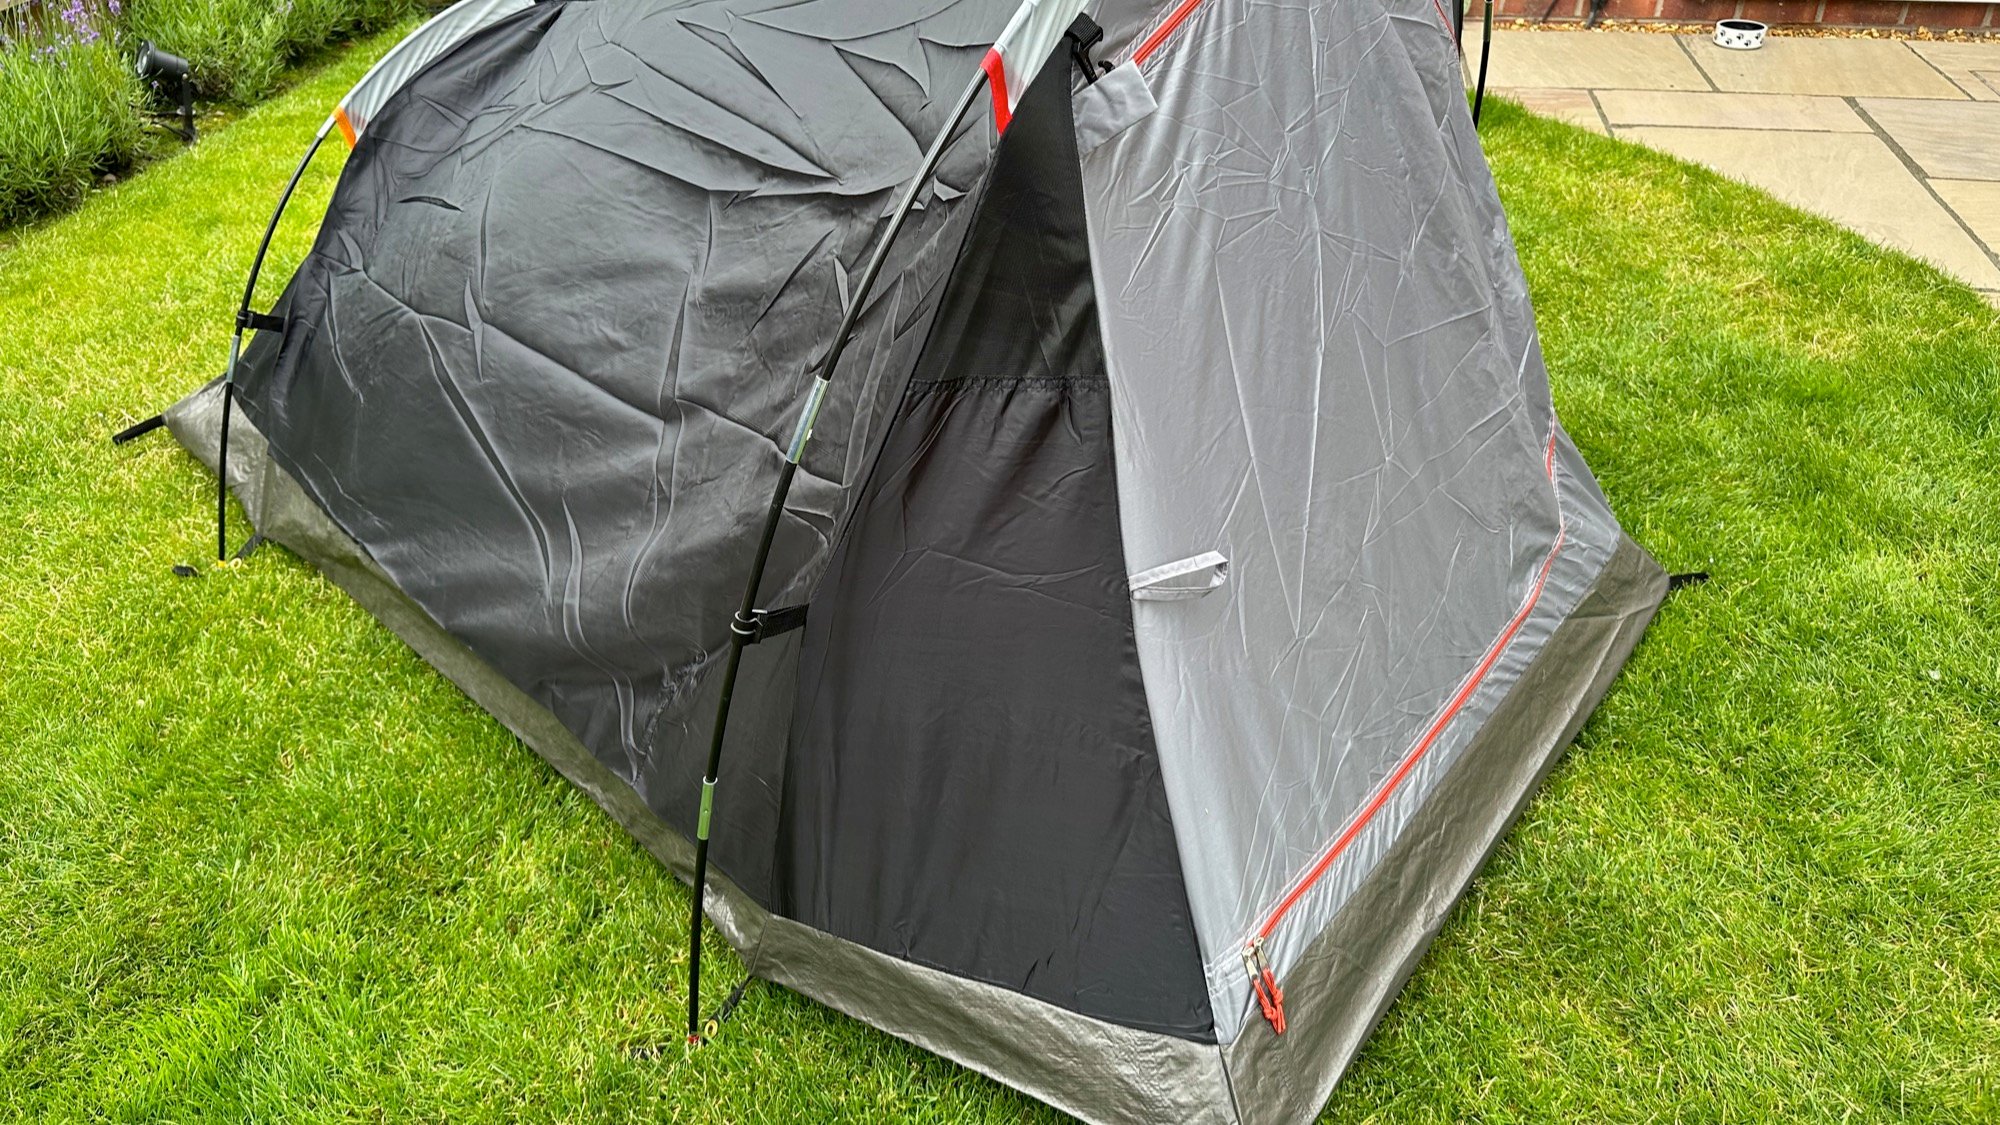 The inner tent pitched